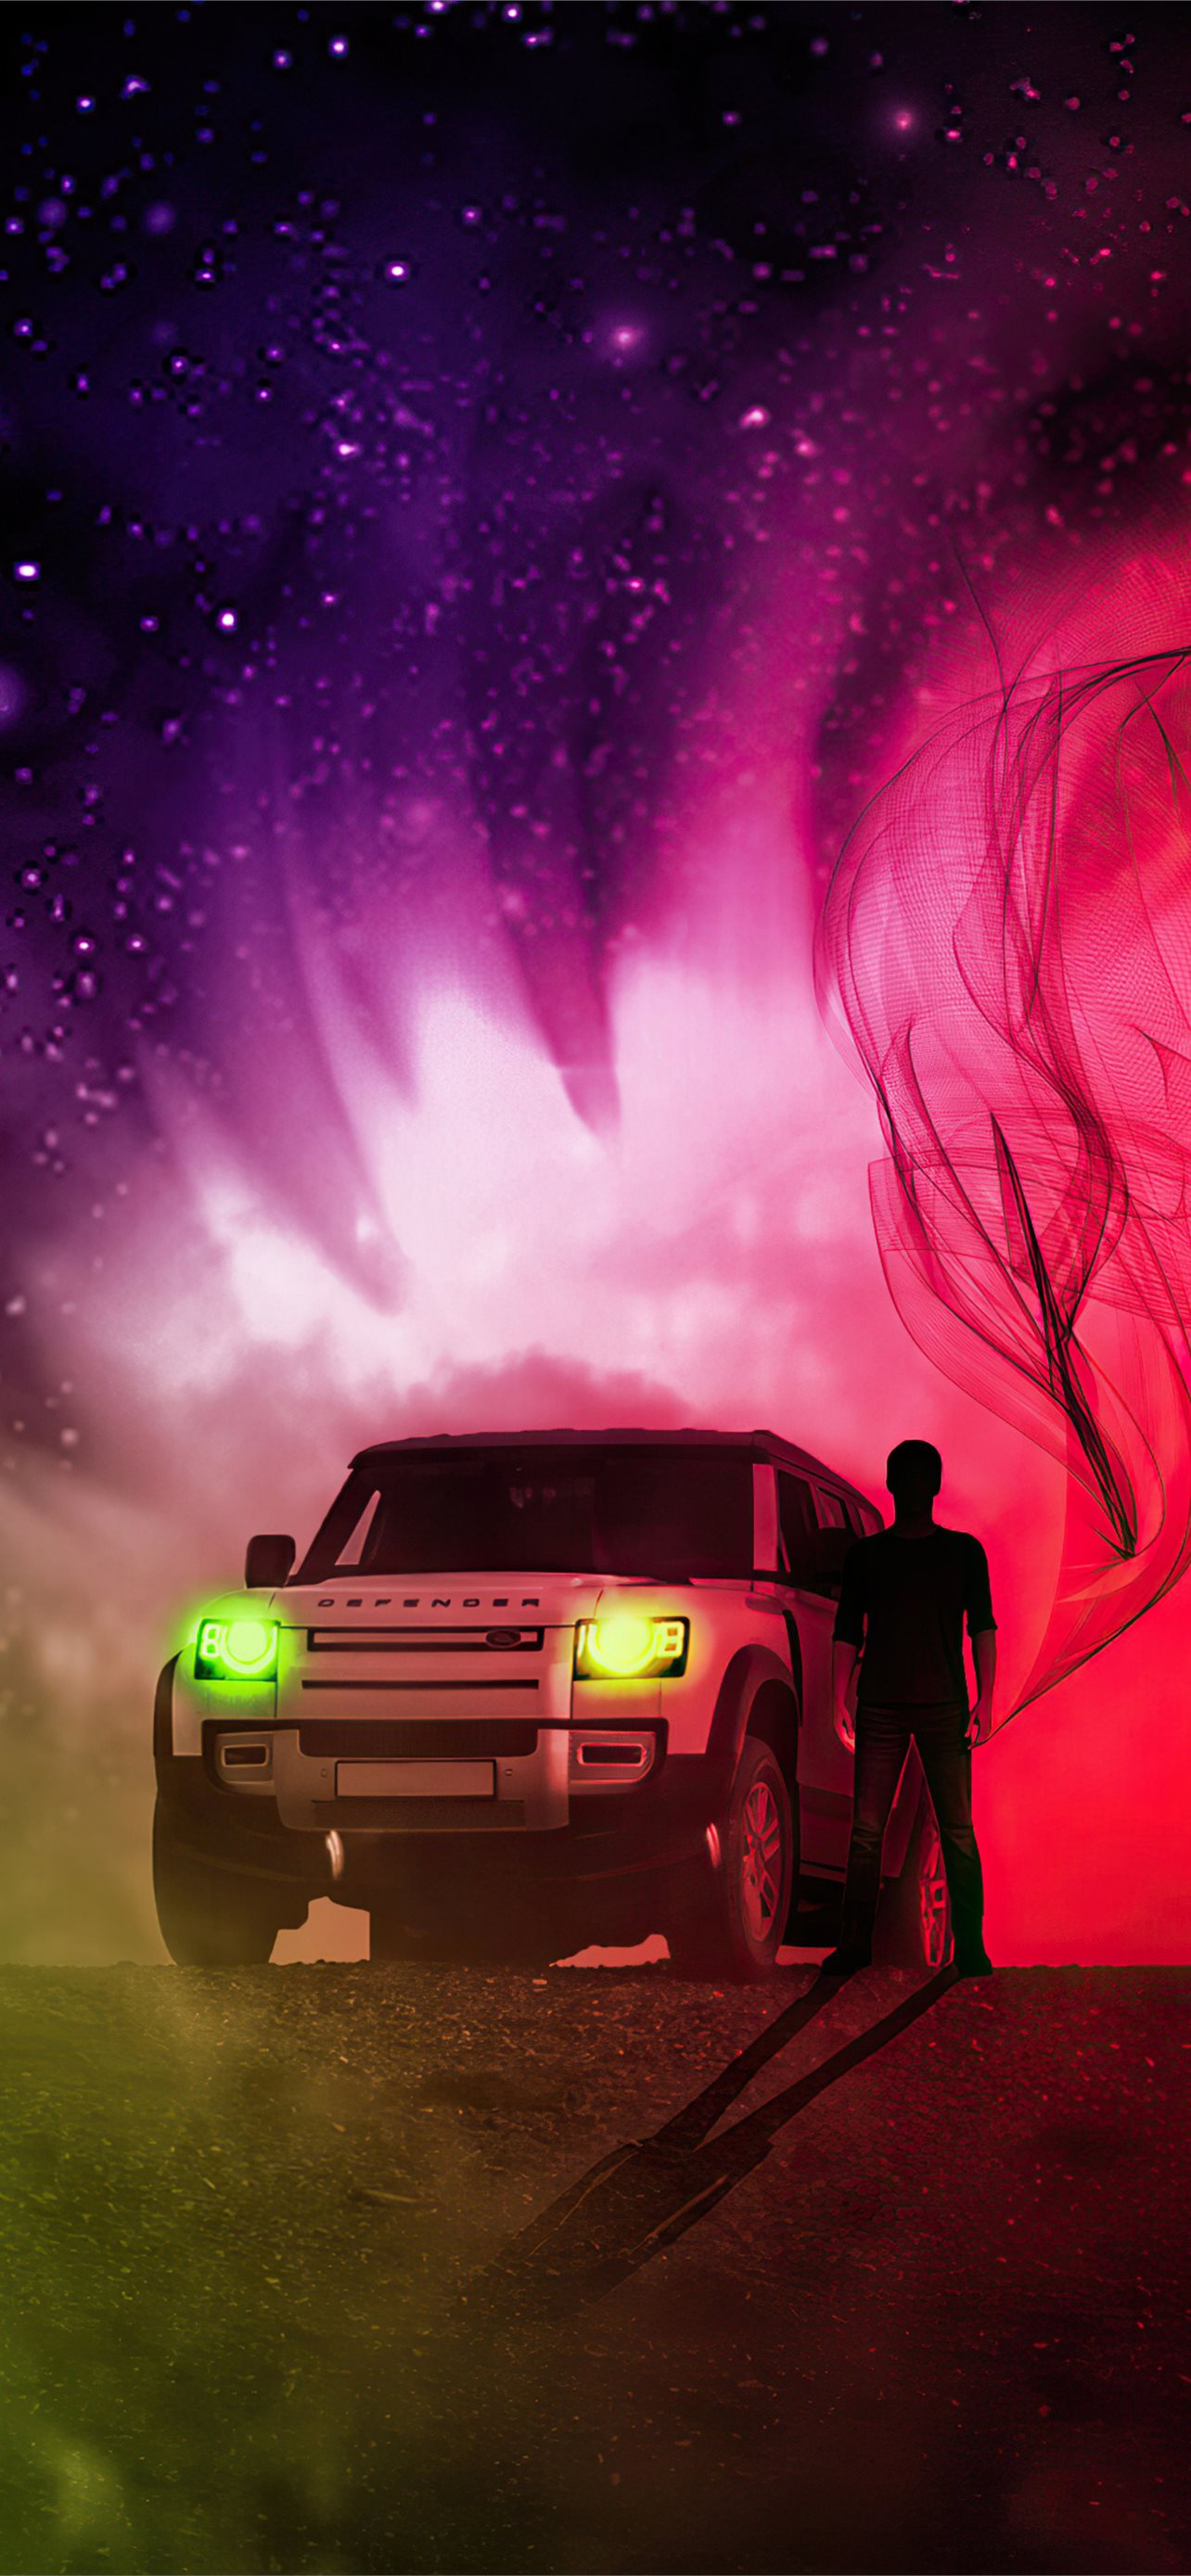 Land Rover Defender Manipulation 4k Samsung Galaxy... iPhone Wallpapers  Free Download